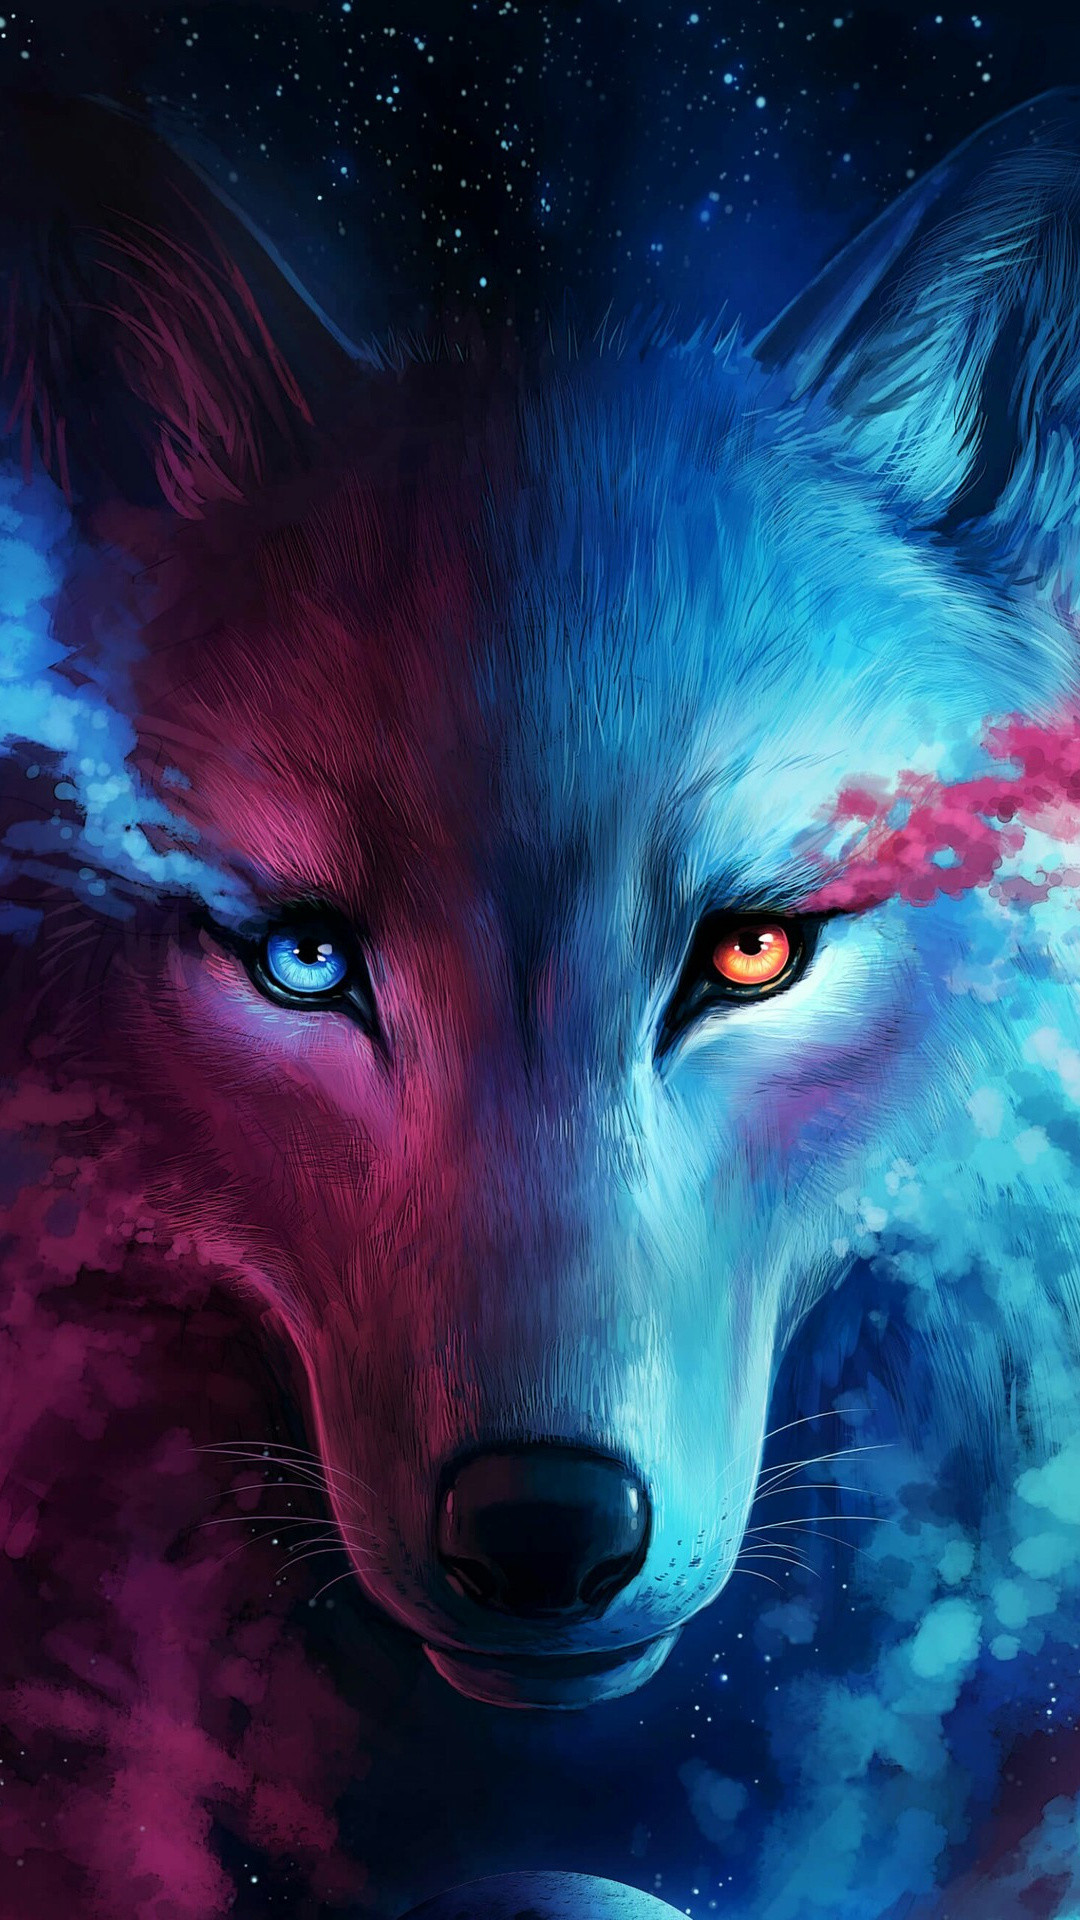 Free download 74 Wolf Art Wallpapers on WallpaperPlay ...